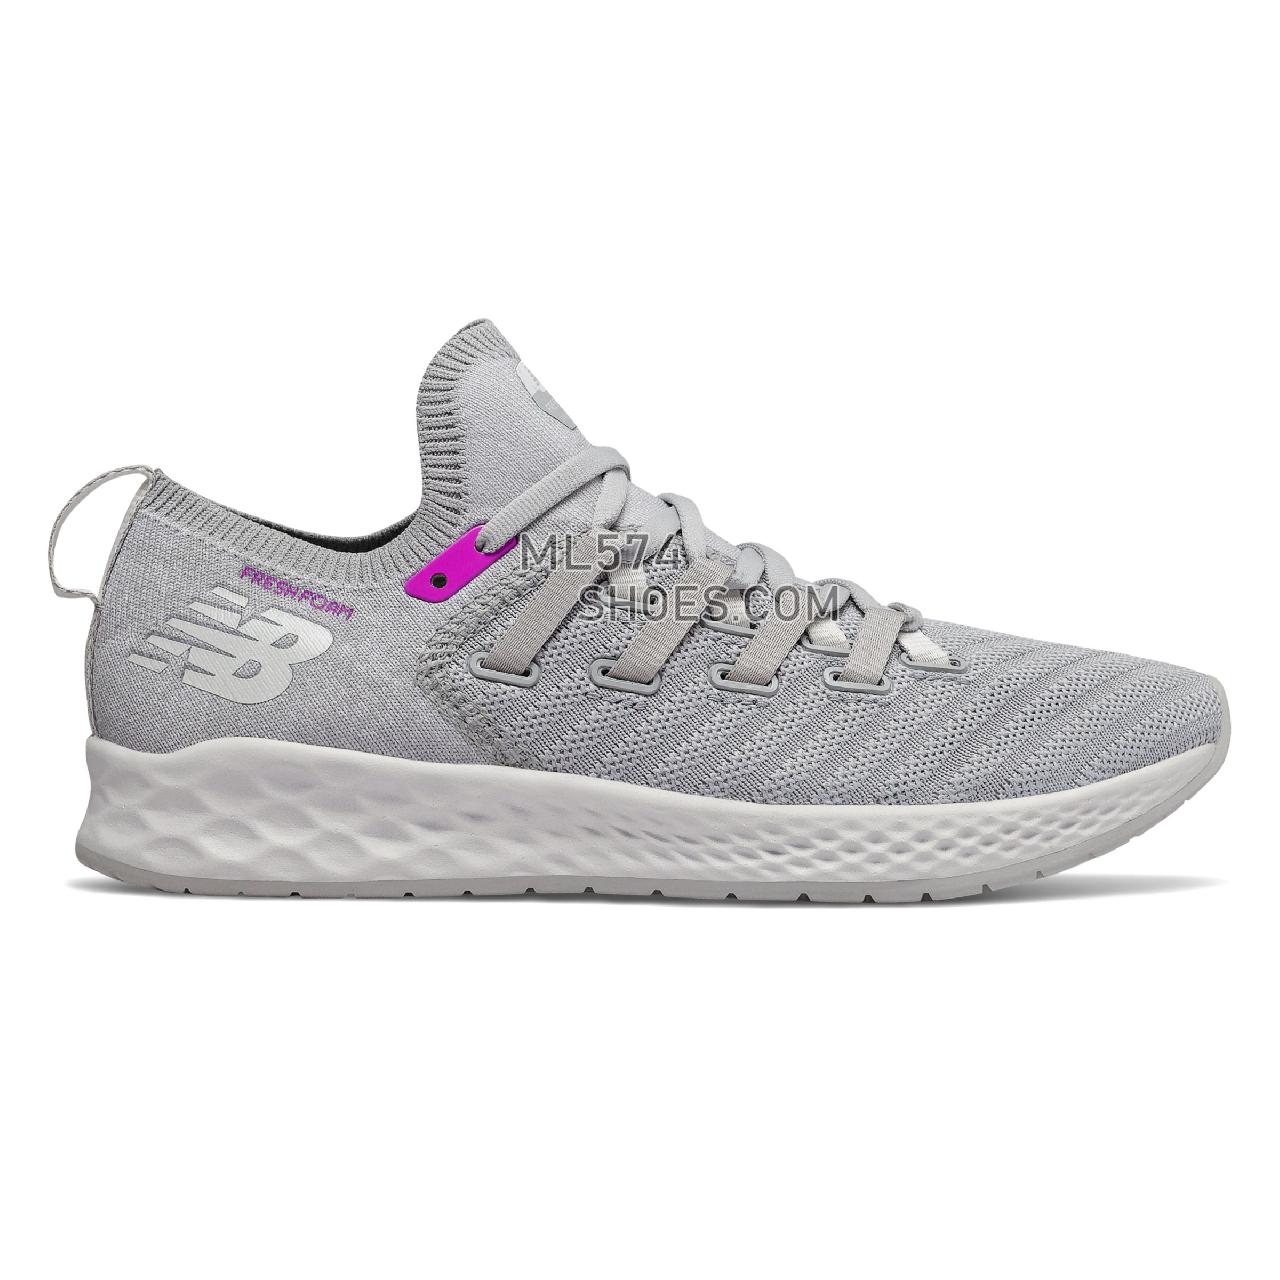 New Balance Fresh Foam Zante Trainer - Women's Fresh Foam Zante Trainer - Rain Cloud with Nimbus Cloud and Voltage Violet - WXZNTLW